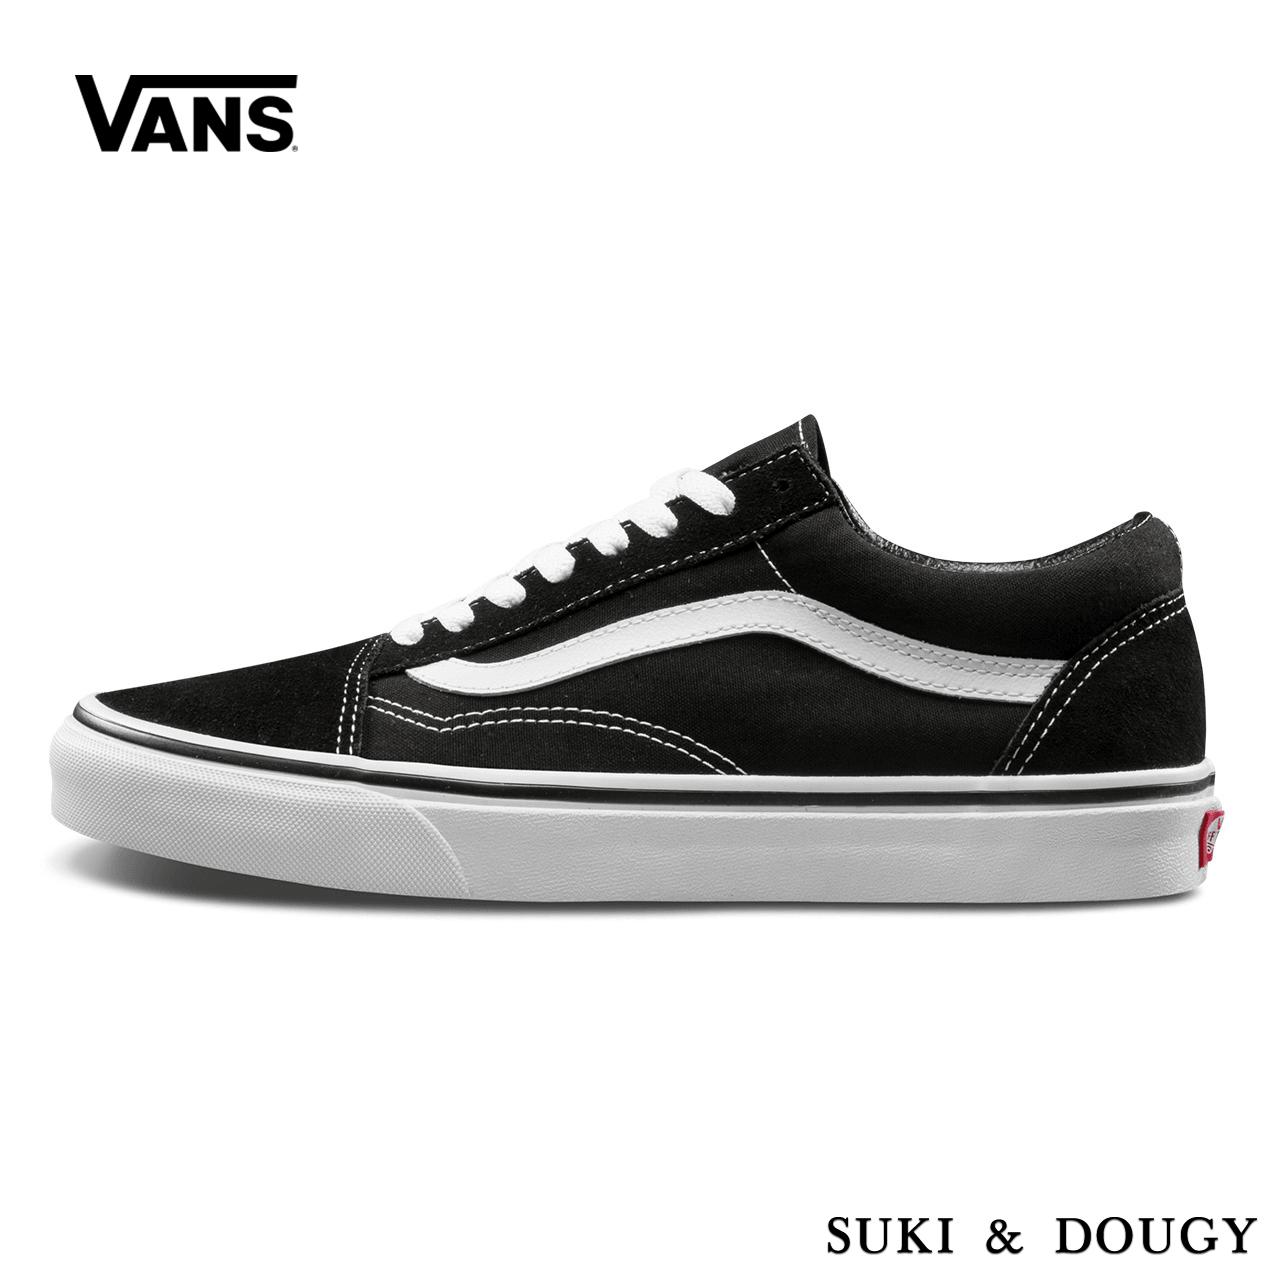 where to buy vans shoes in singapore